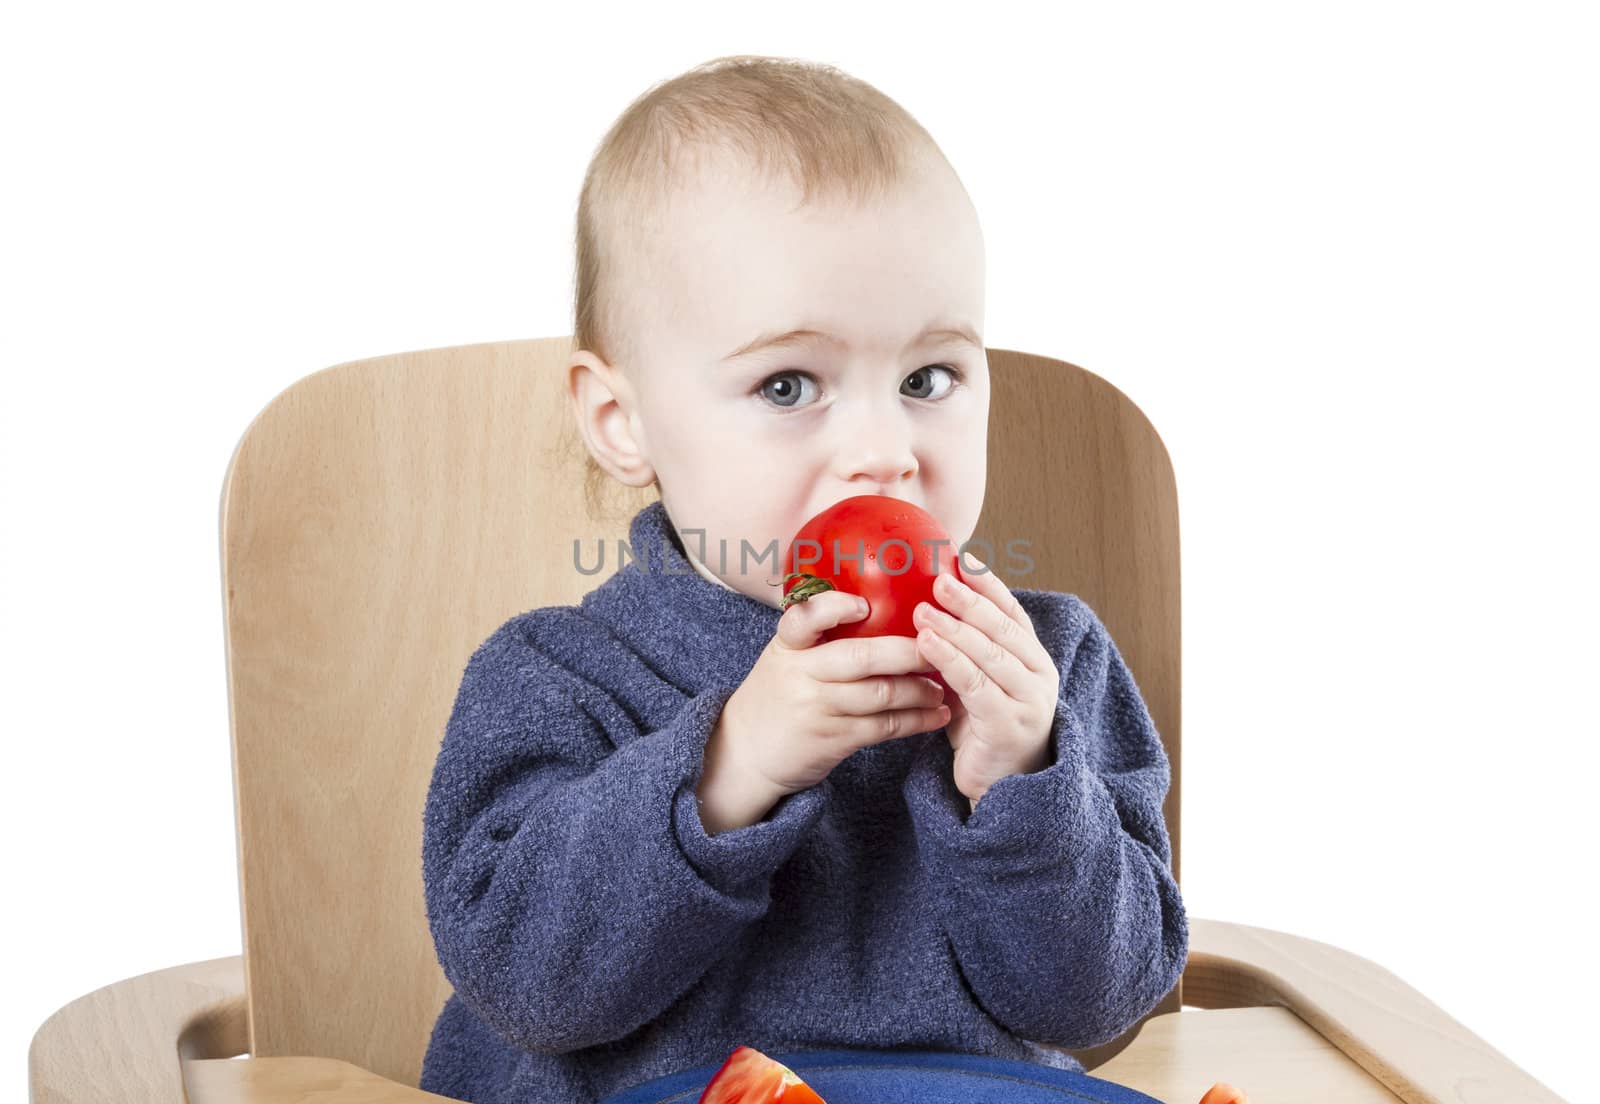 young child eating tomatoes in high chair isolated in white backgound